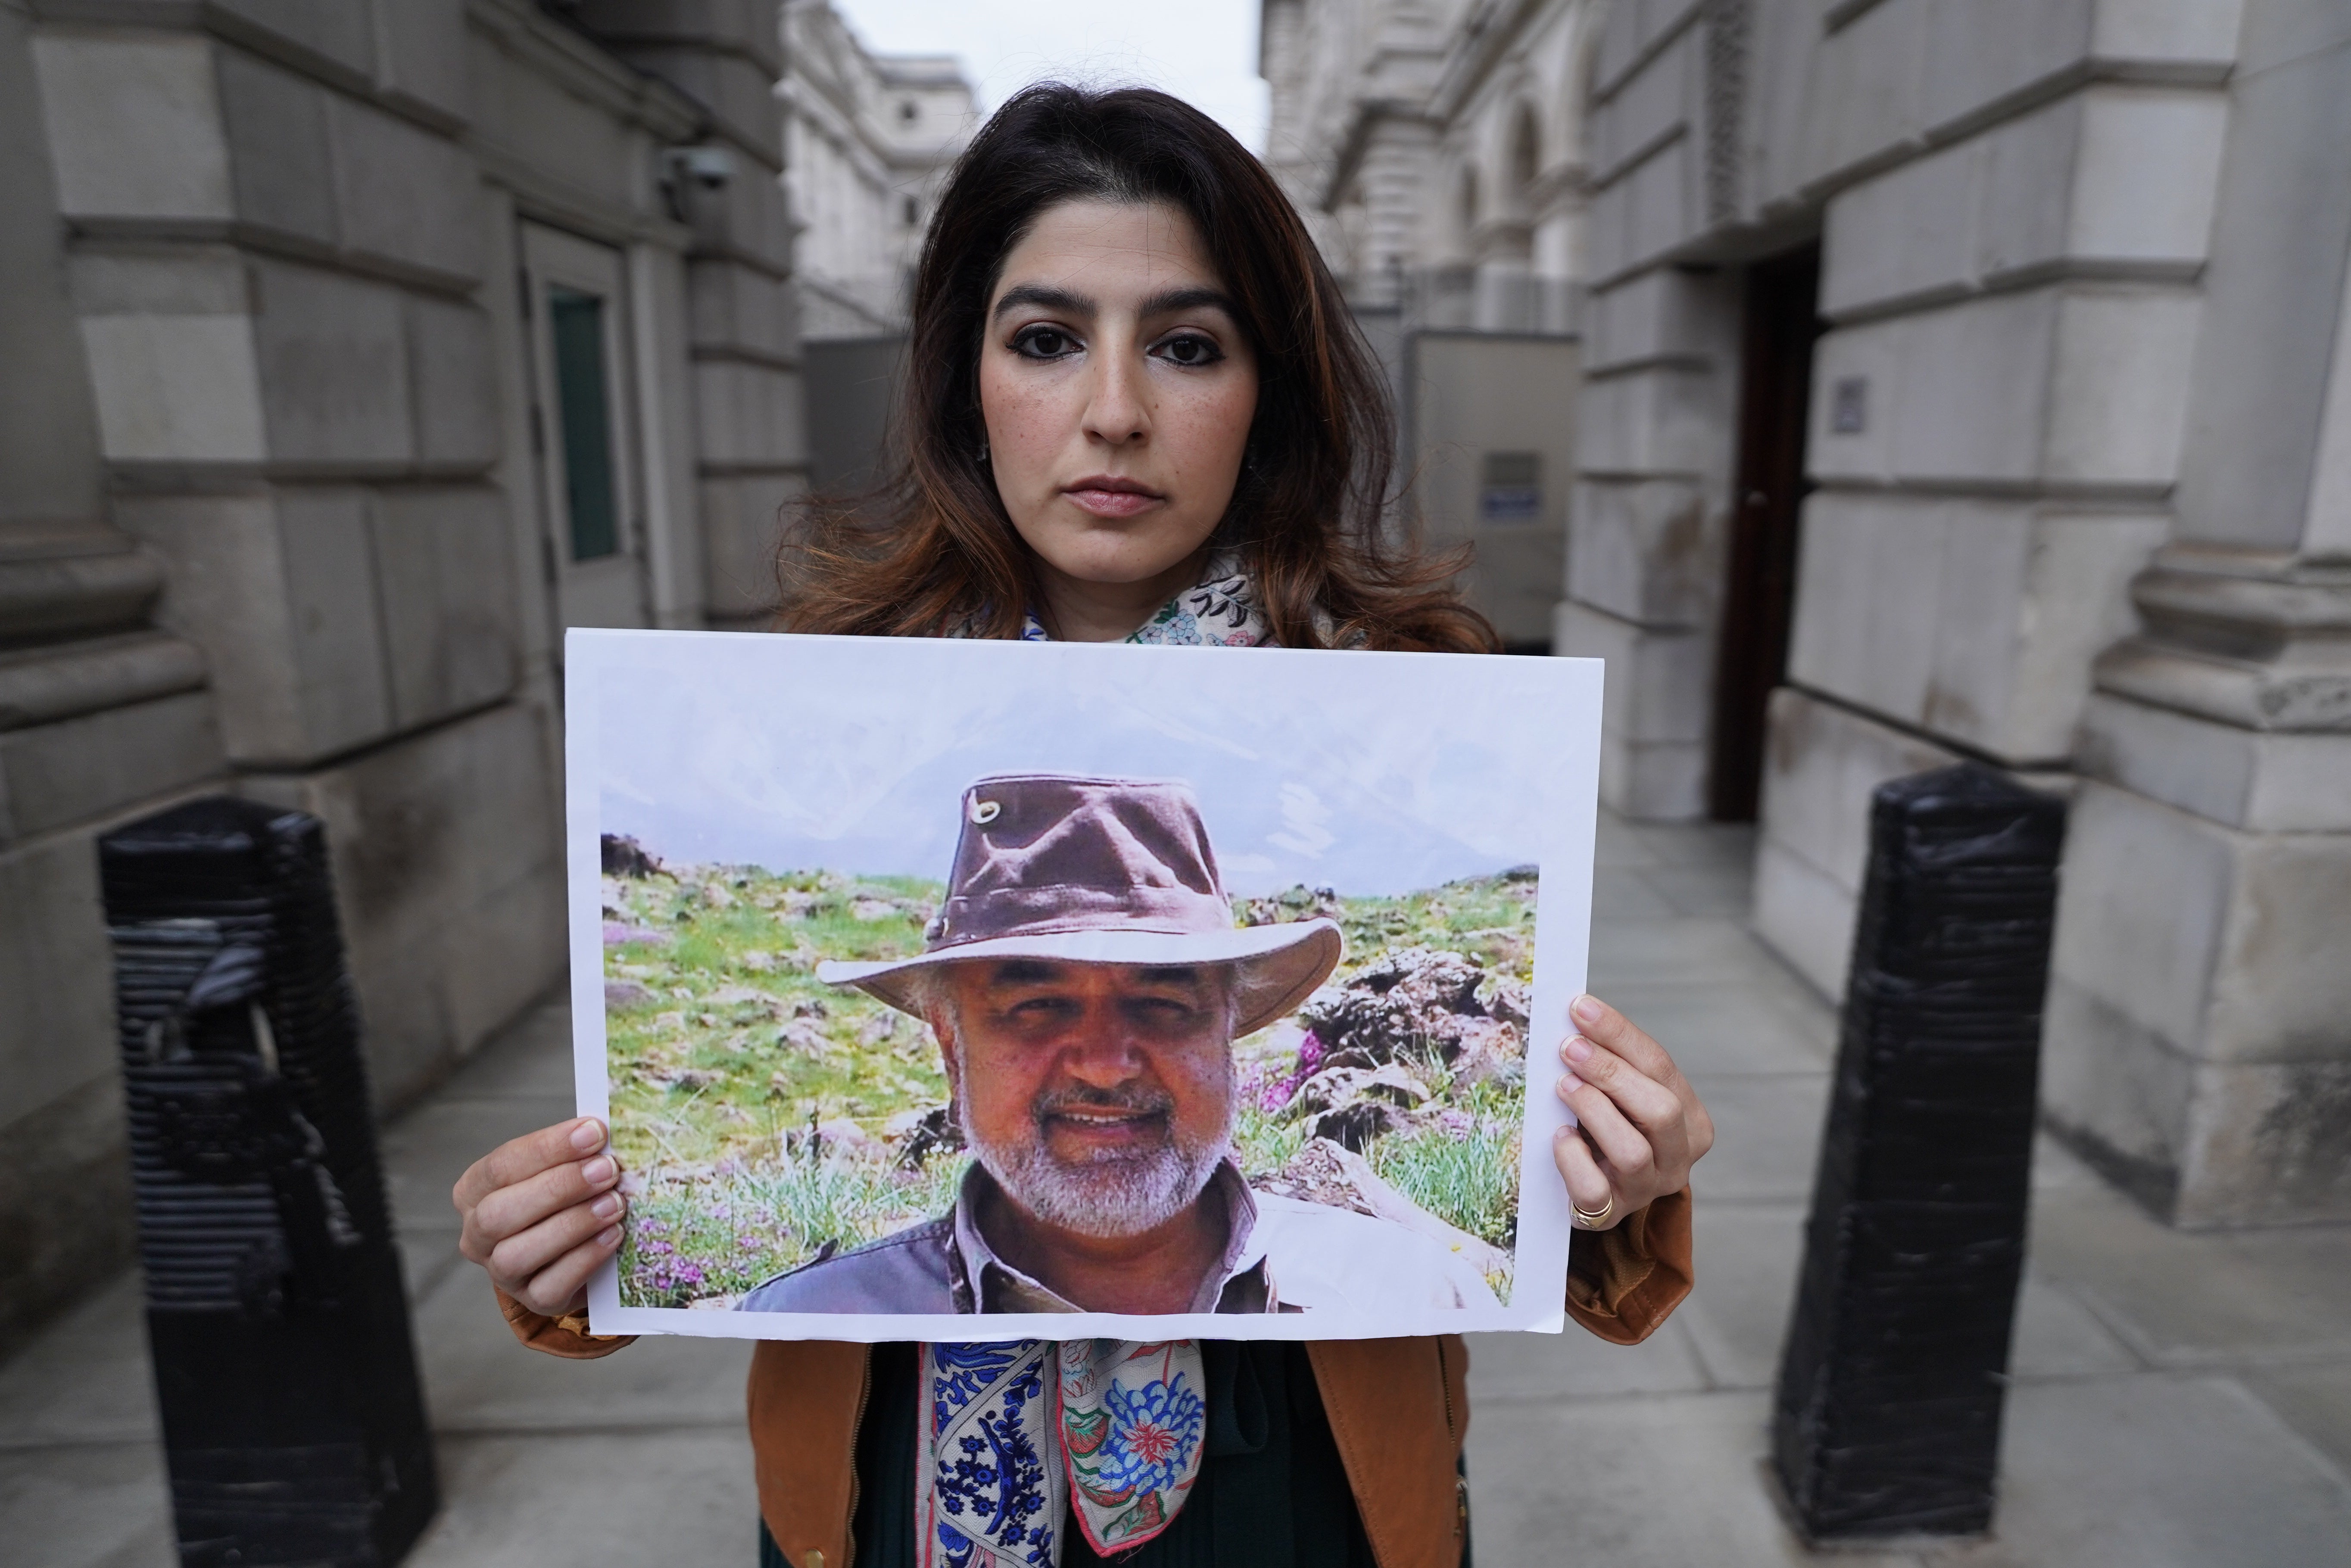 With her father, Morad Tahbaz, back in prison, Roxanne Tahbaz says her family has been ‘abandoned’ by the UK government